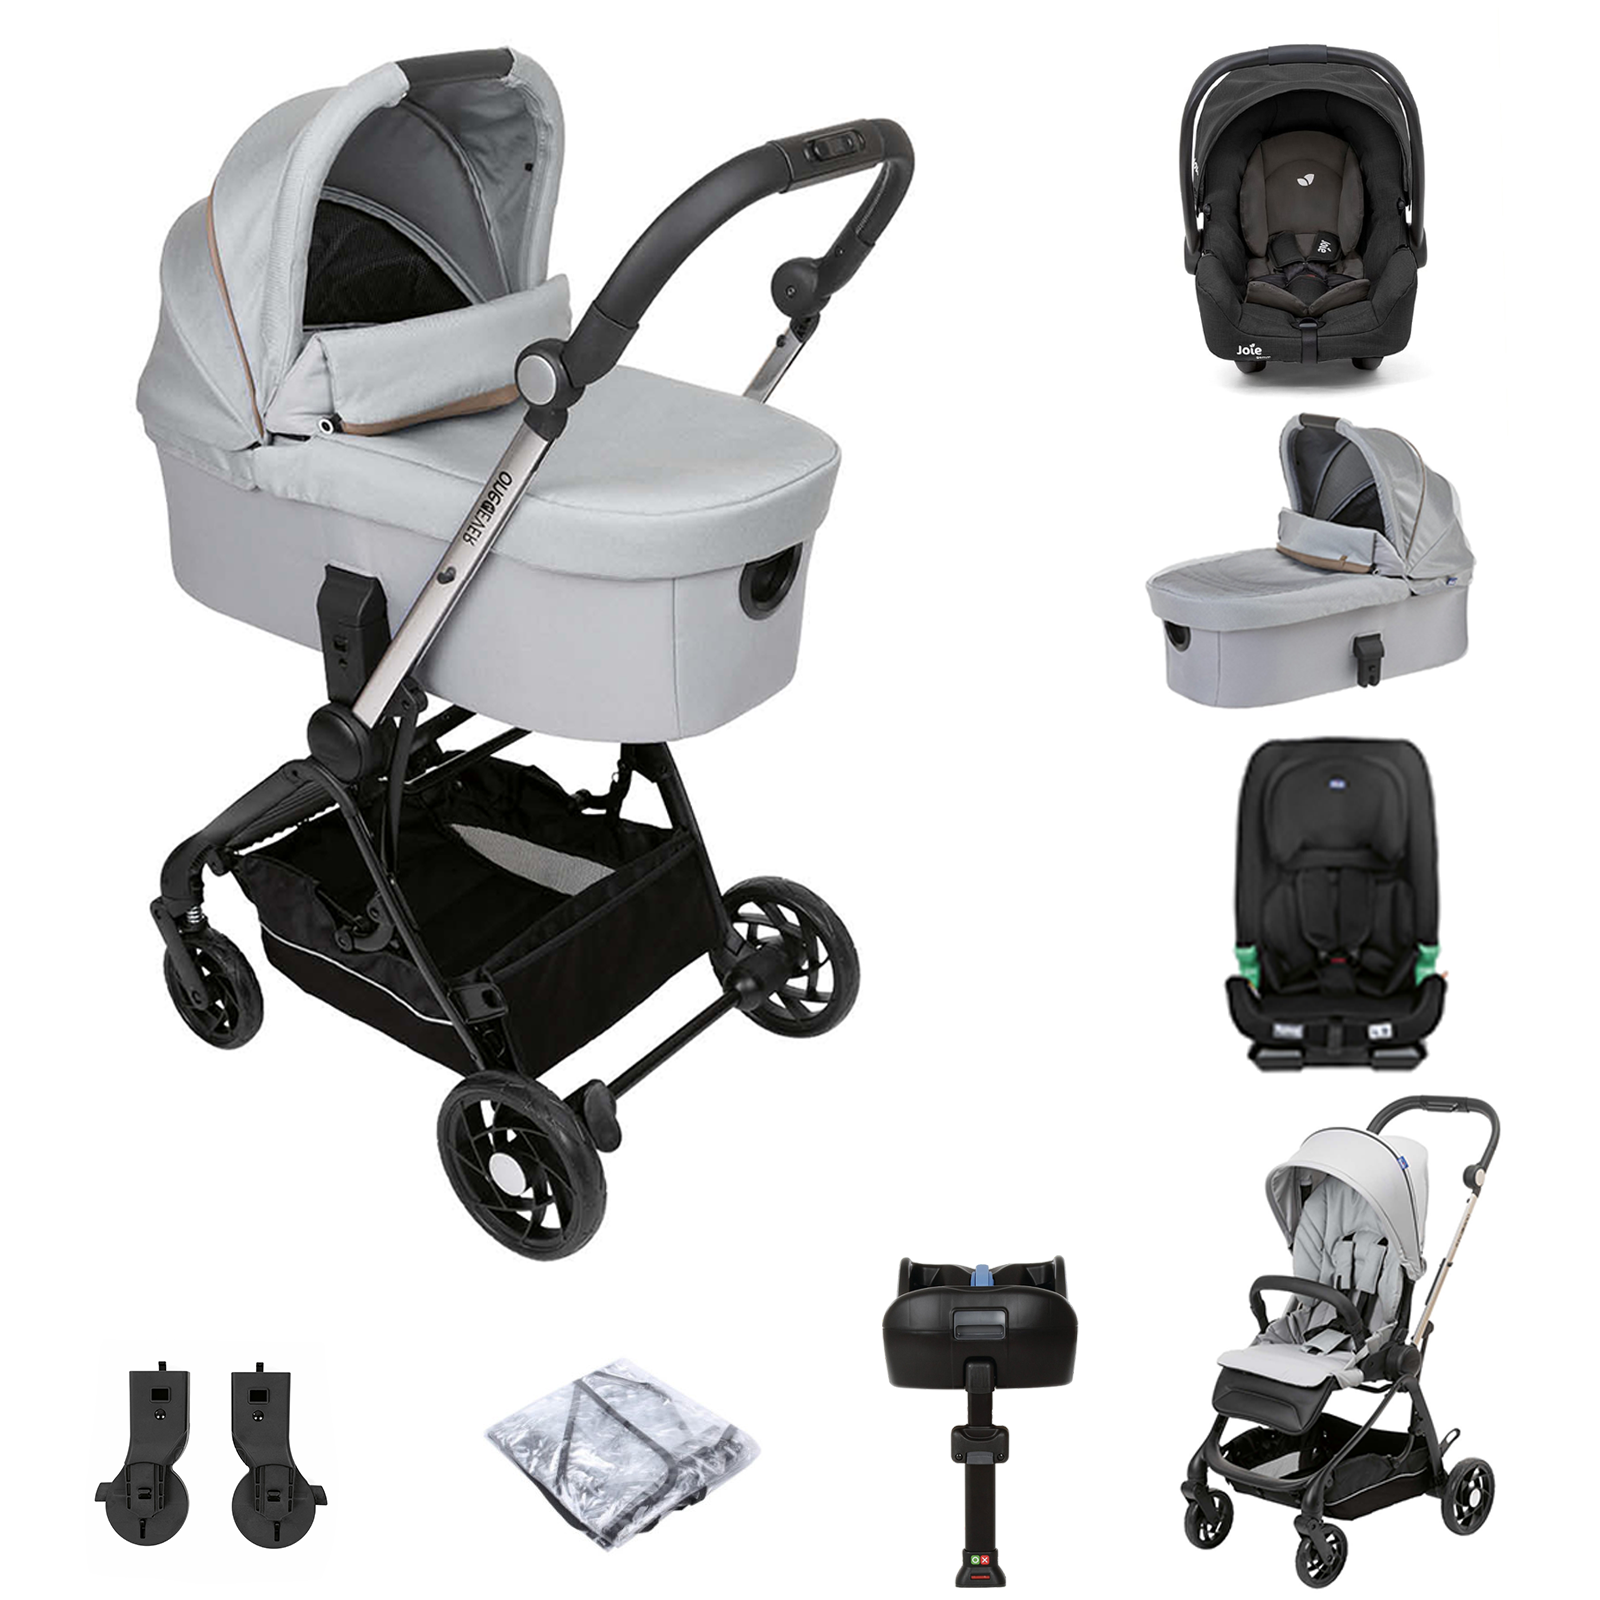 Chicco One4ever Gemm ISOFIX Travel System, Carry Cot & I-Size Car Seat - Silver Leaf